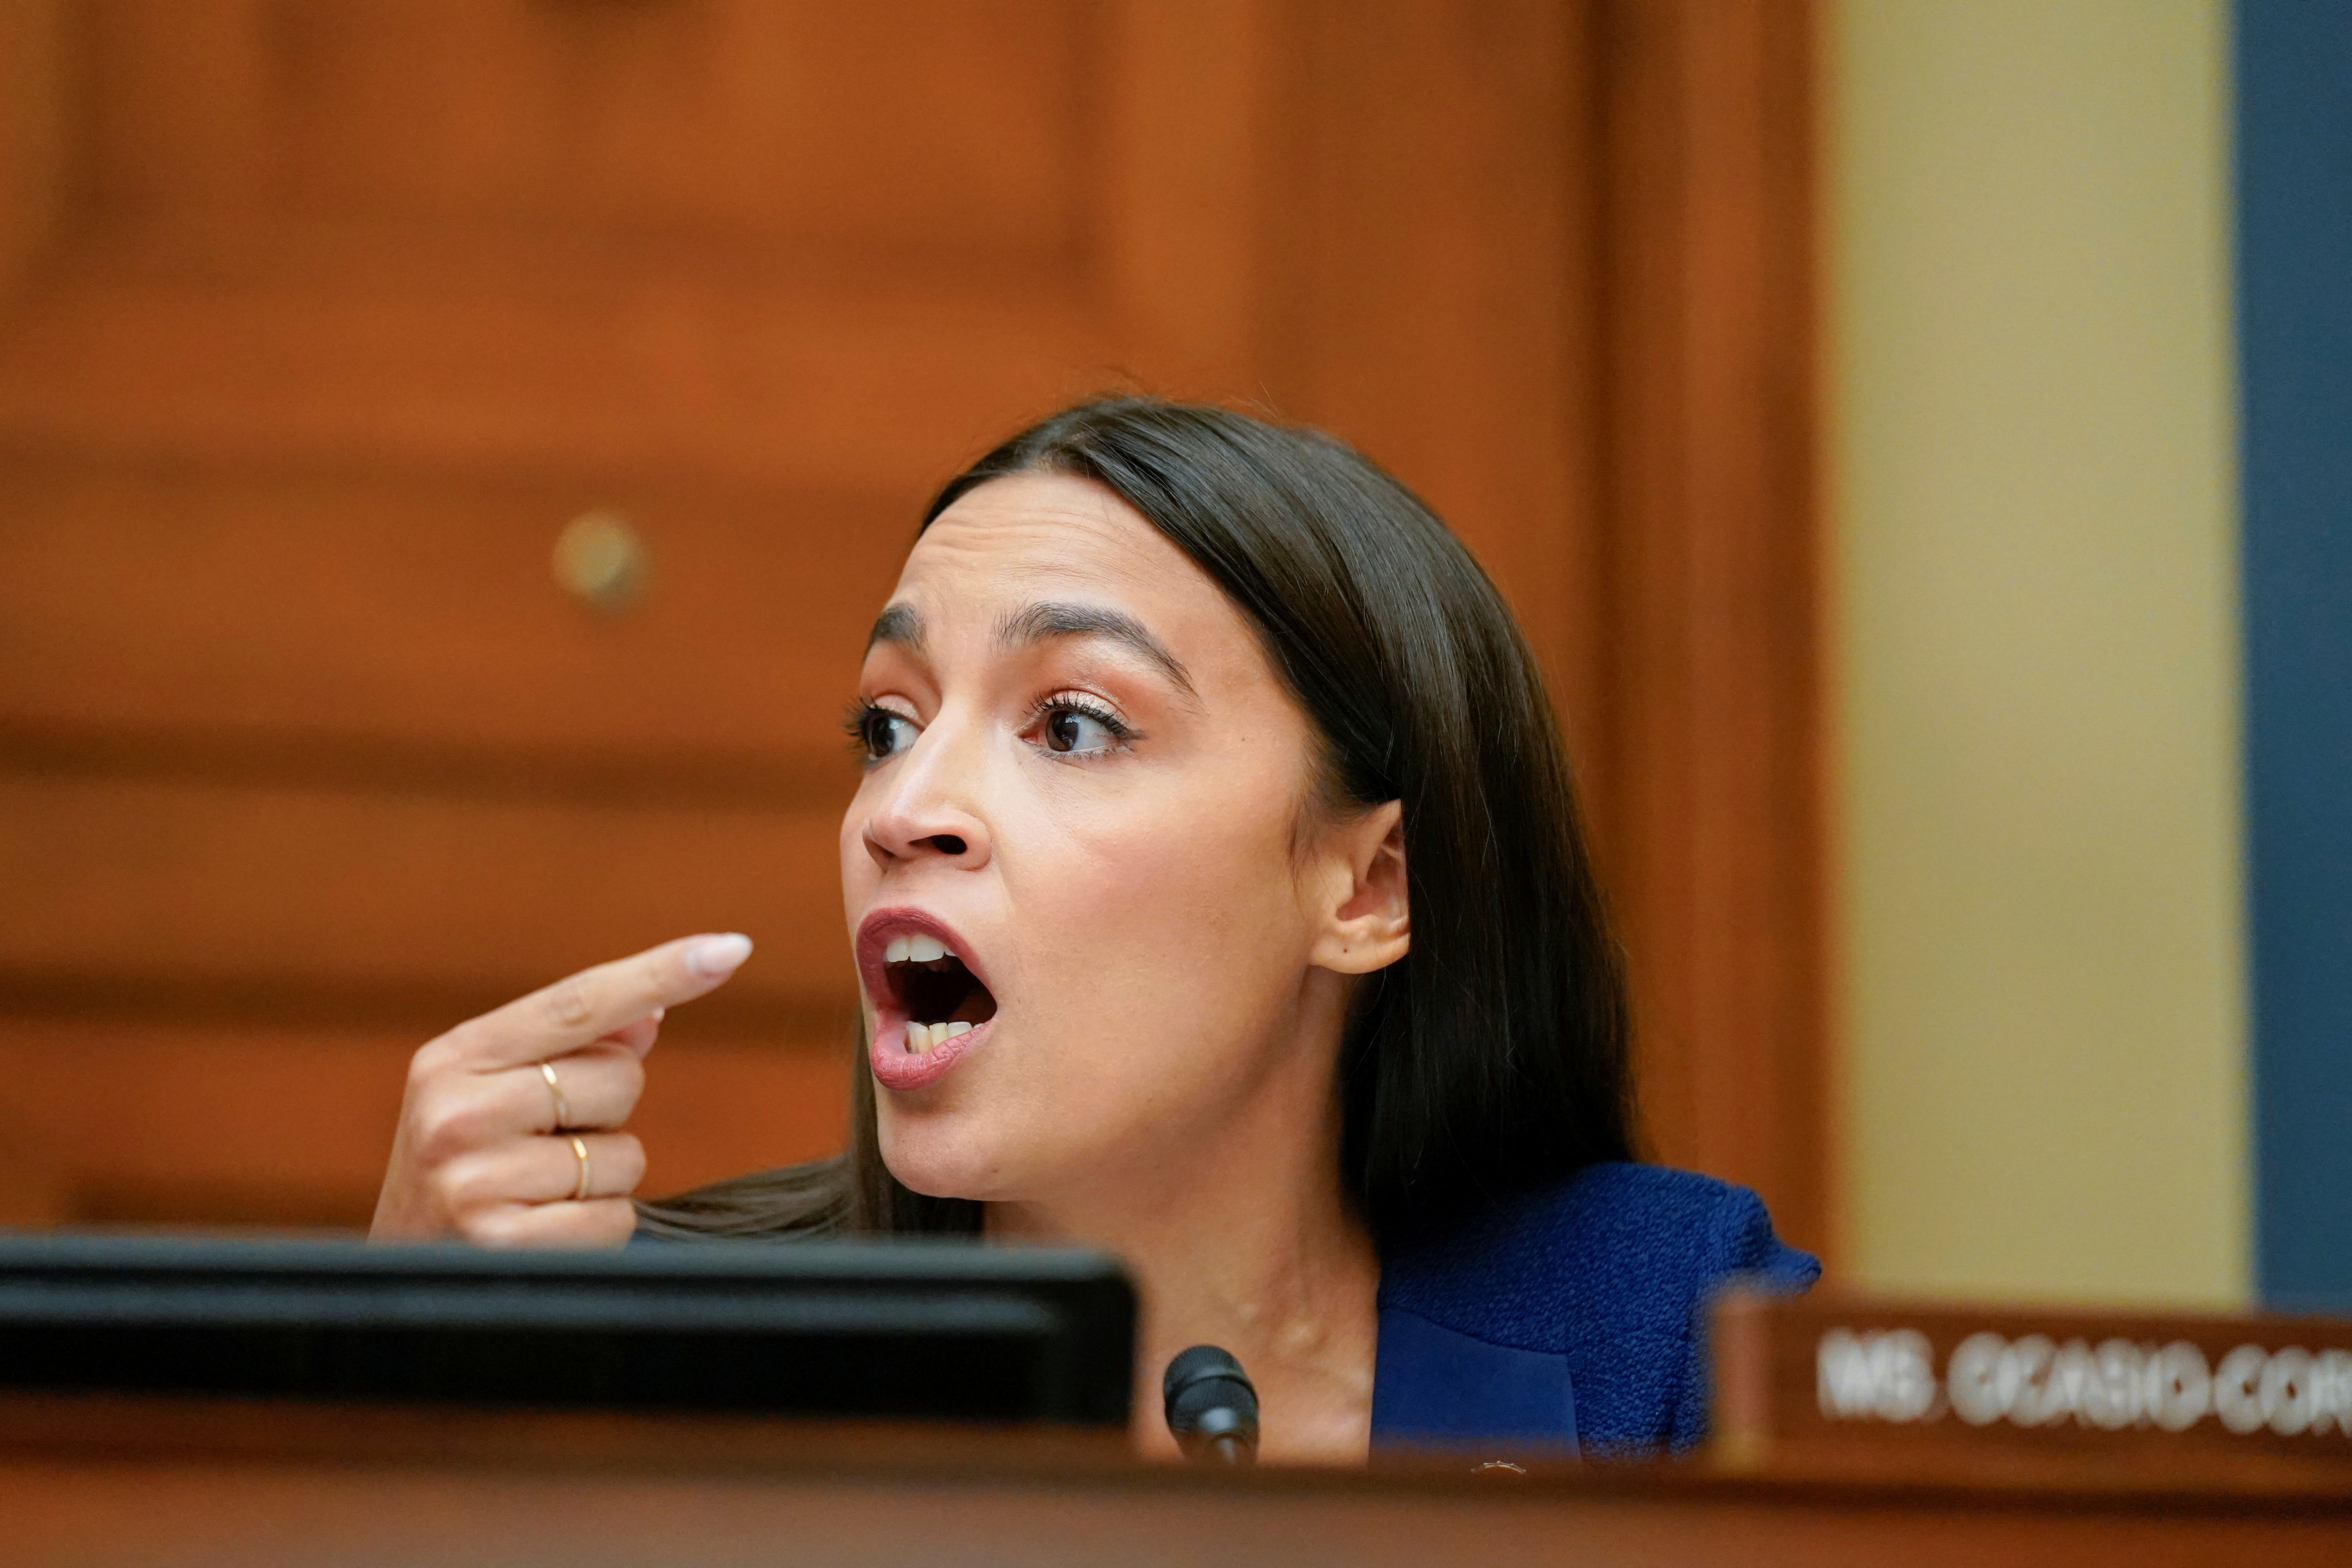 U.S. Representative Alexandria Ocasio-Cortez (D-NY) speaks during a House Committee on Oversight and Reform hearing on gun violence on Capitol Hill in Washington, U.S. June 8, 2022